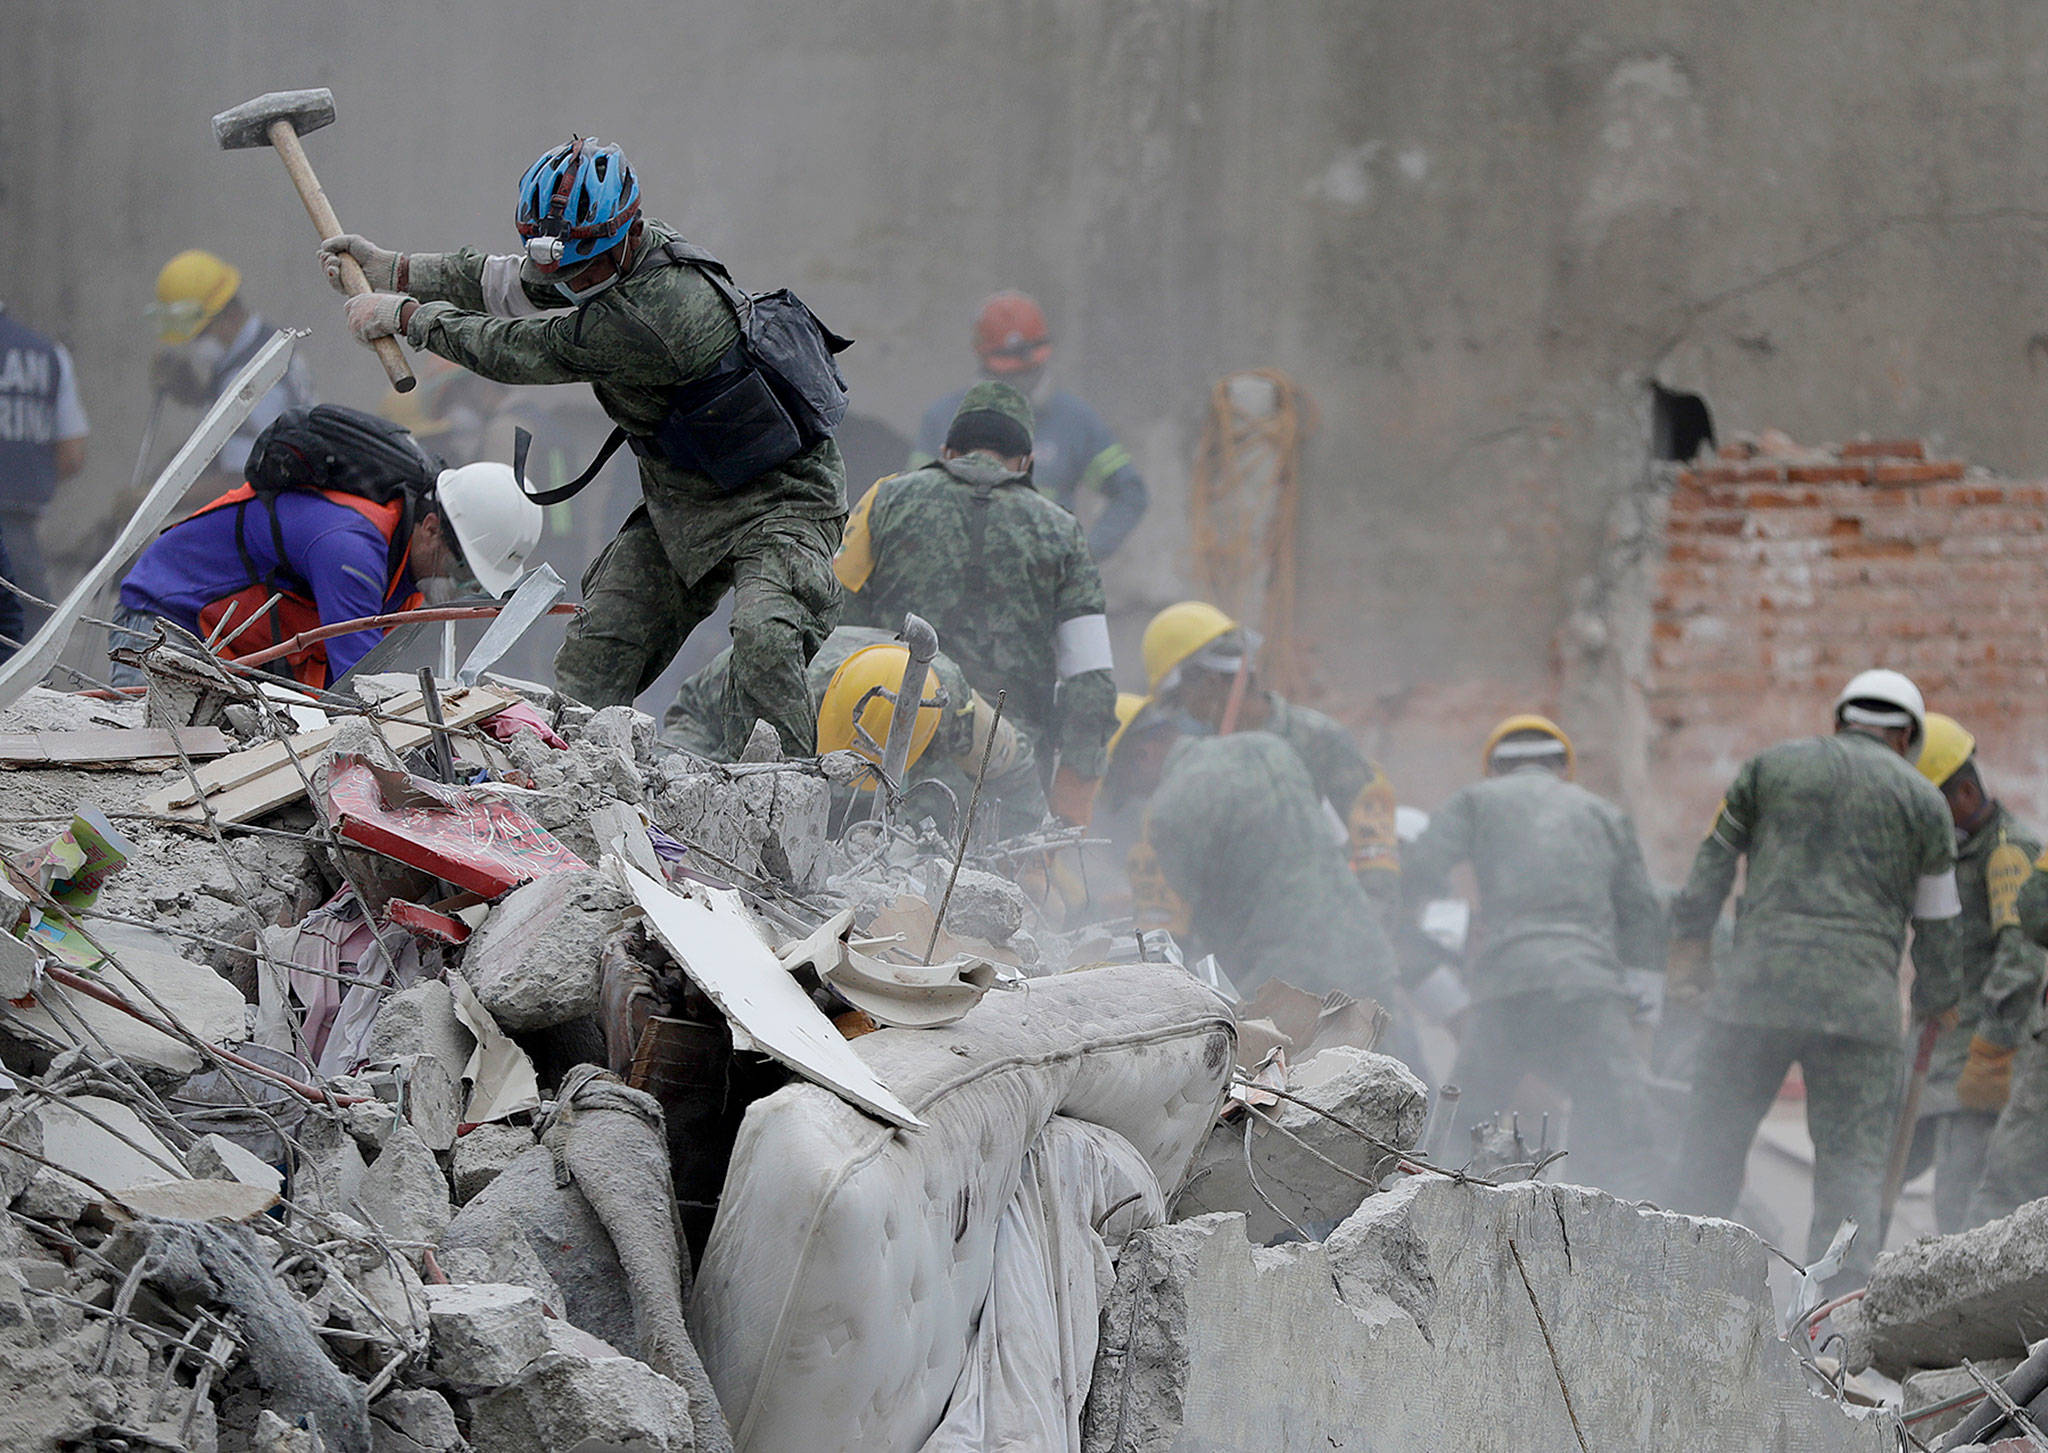 Rescue workers search for survivors at an apartment building that collapsed during an earthquake in the Condesa neighborhood of Mexico City on Thursday. (AP Photo/Natacha Pisarenko)